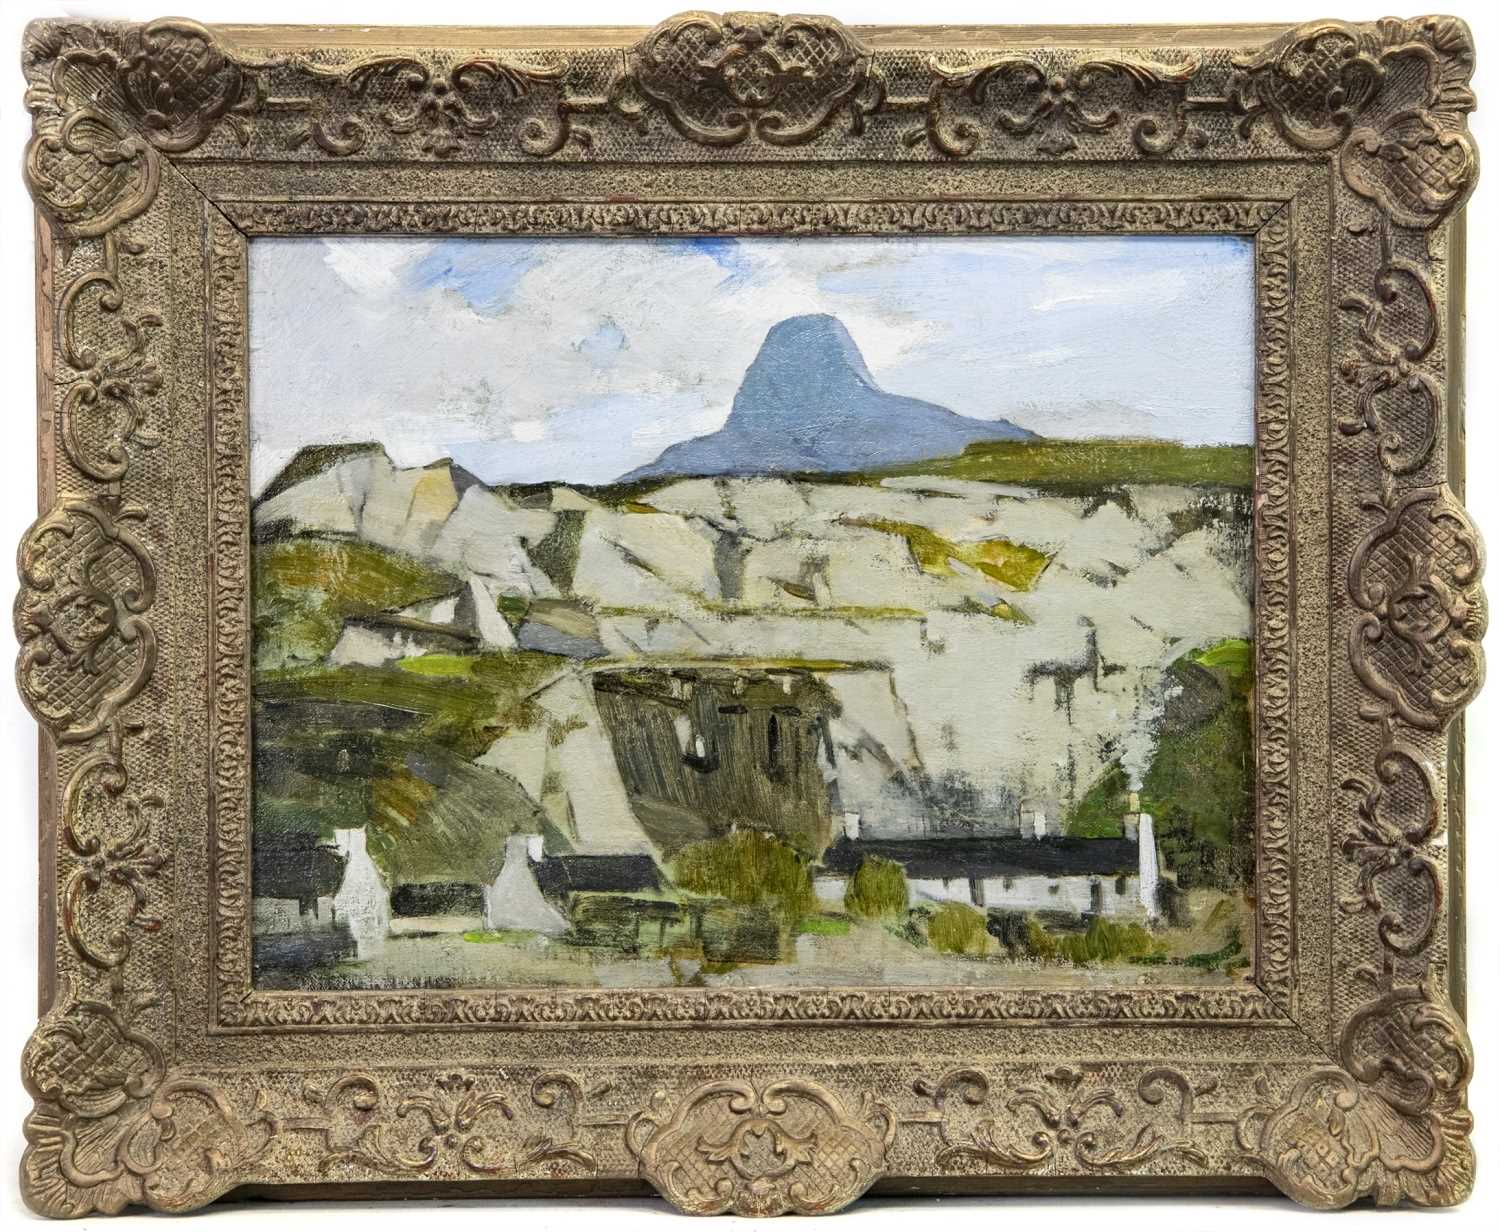 Lot 2 - BALLACHULISH QUARRY, AN OIL BY JOHN GUTHRIE SPENCE SMITH